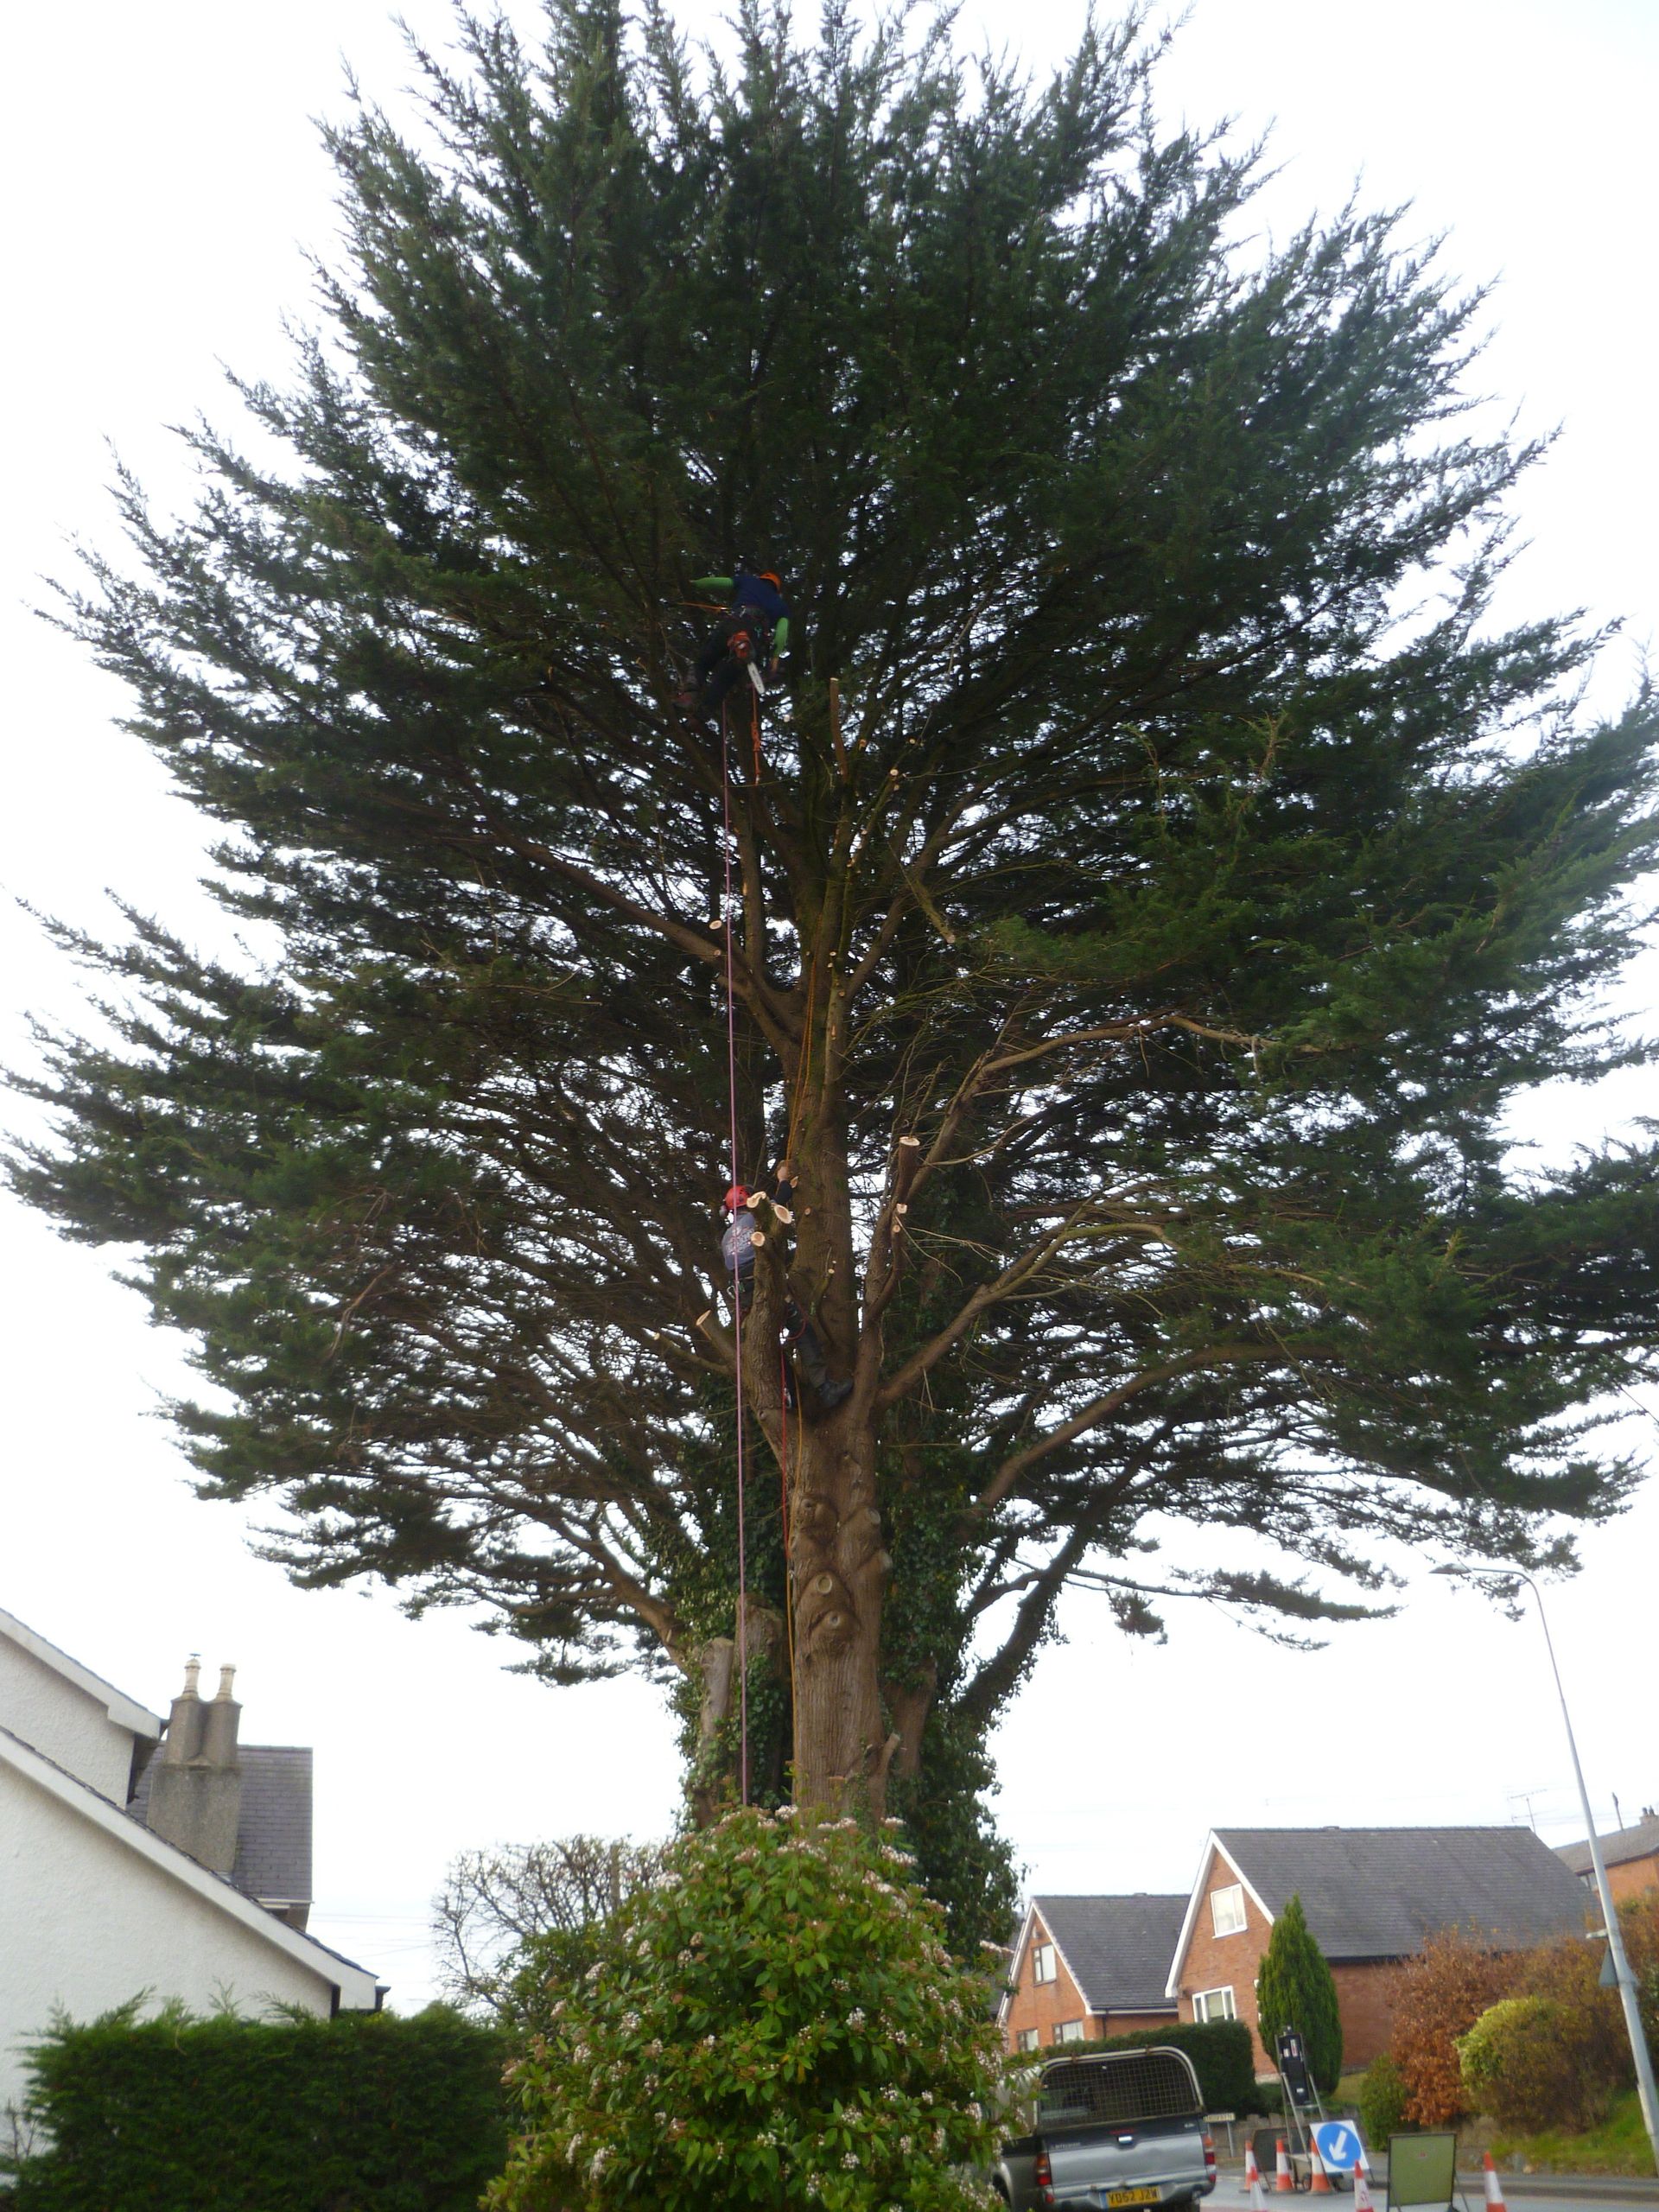 There is a tree surgeon in tha Macrocarpa tree somewhere.